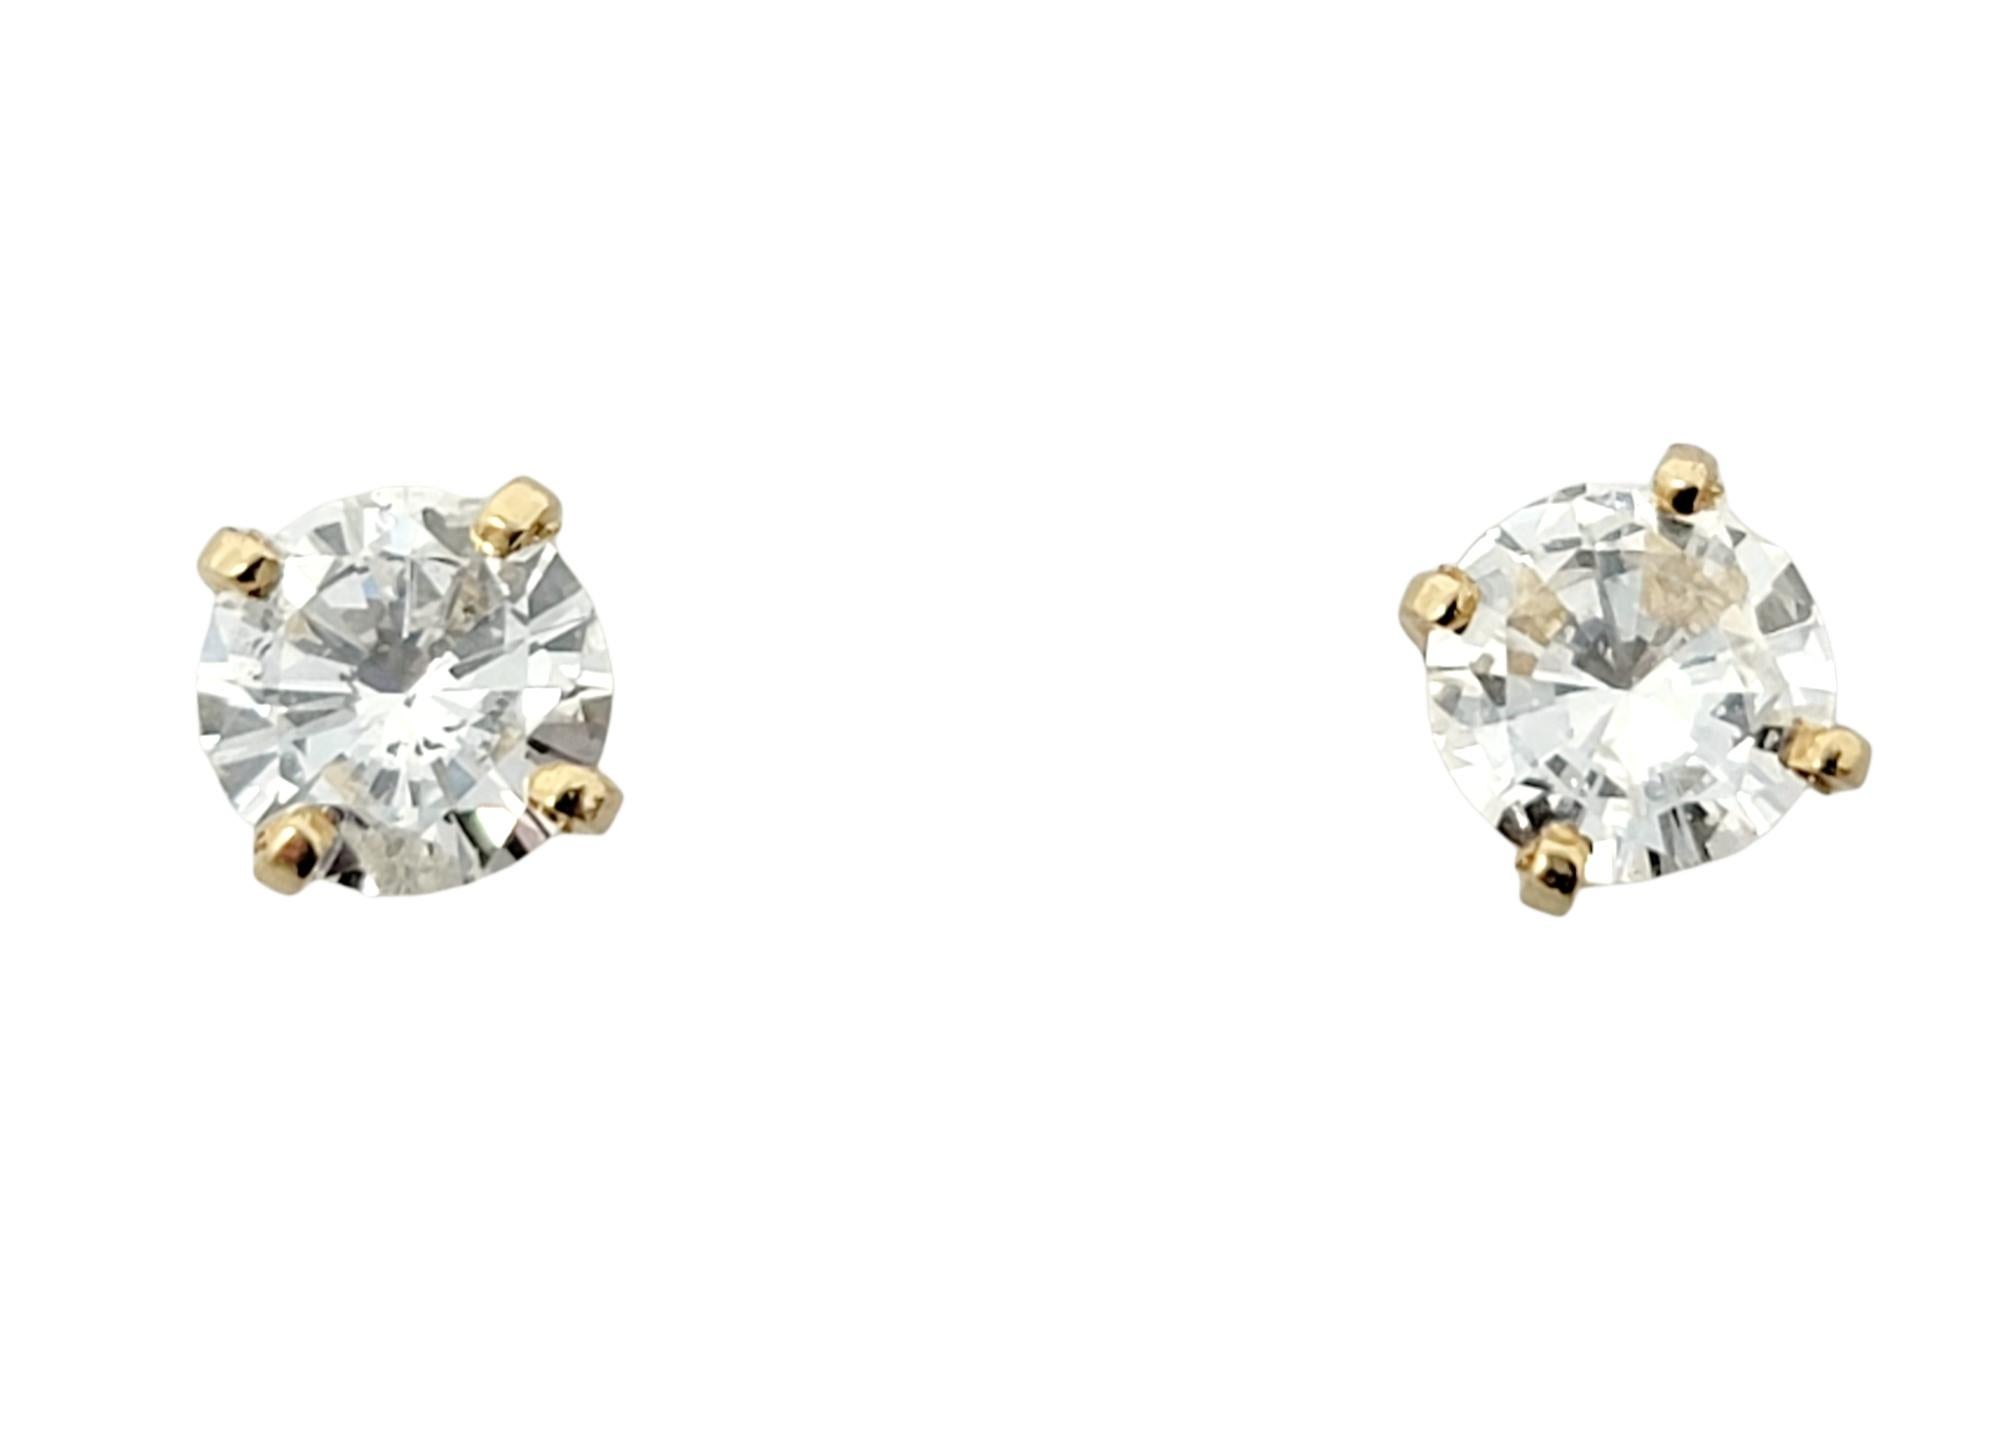 Utterly timeless diamond solitaire stud earrings. These gorgeous round diamond and yellow gold pierced ear studs are the epitome of minimalist elegance. They give just the right hint of sparkle for everyday wear and the classic design ensures they